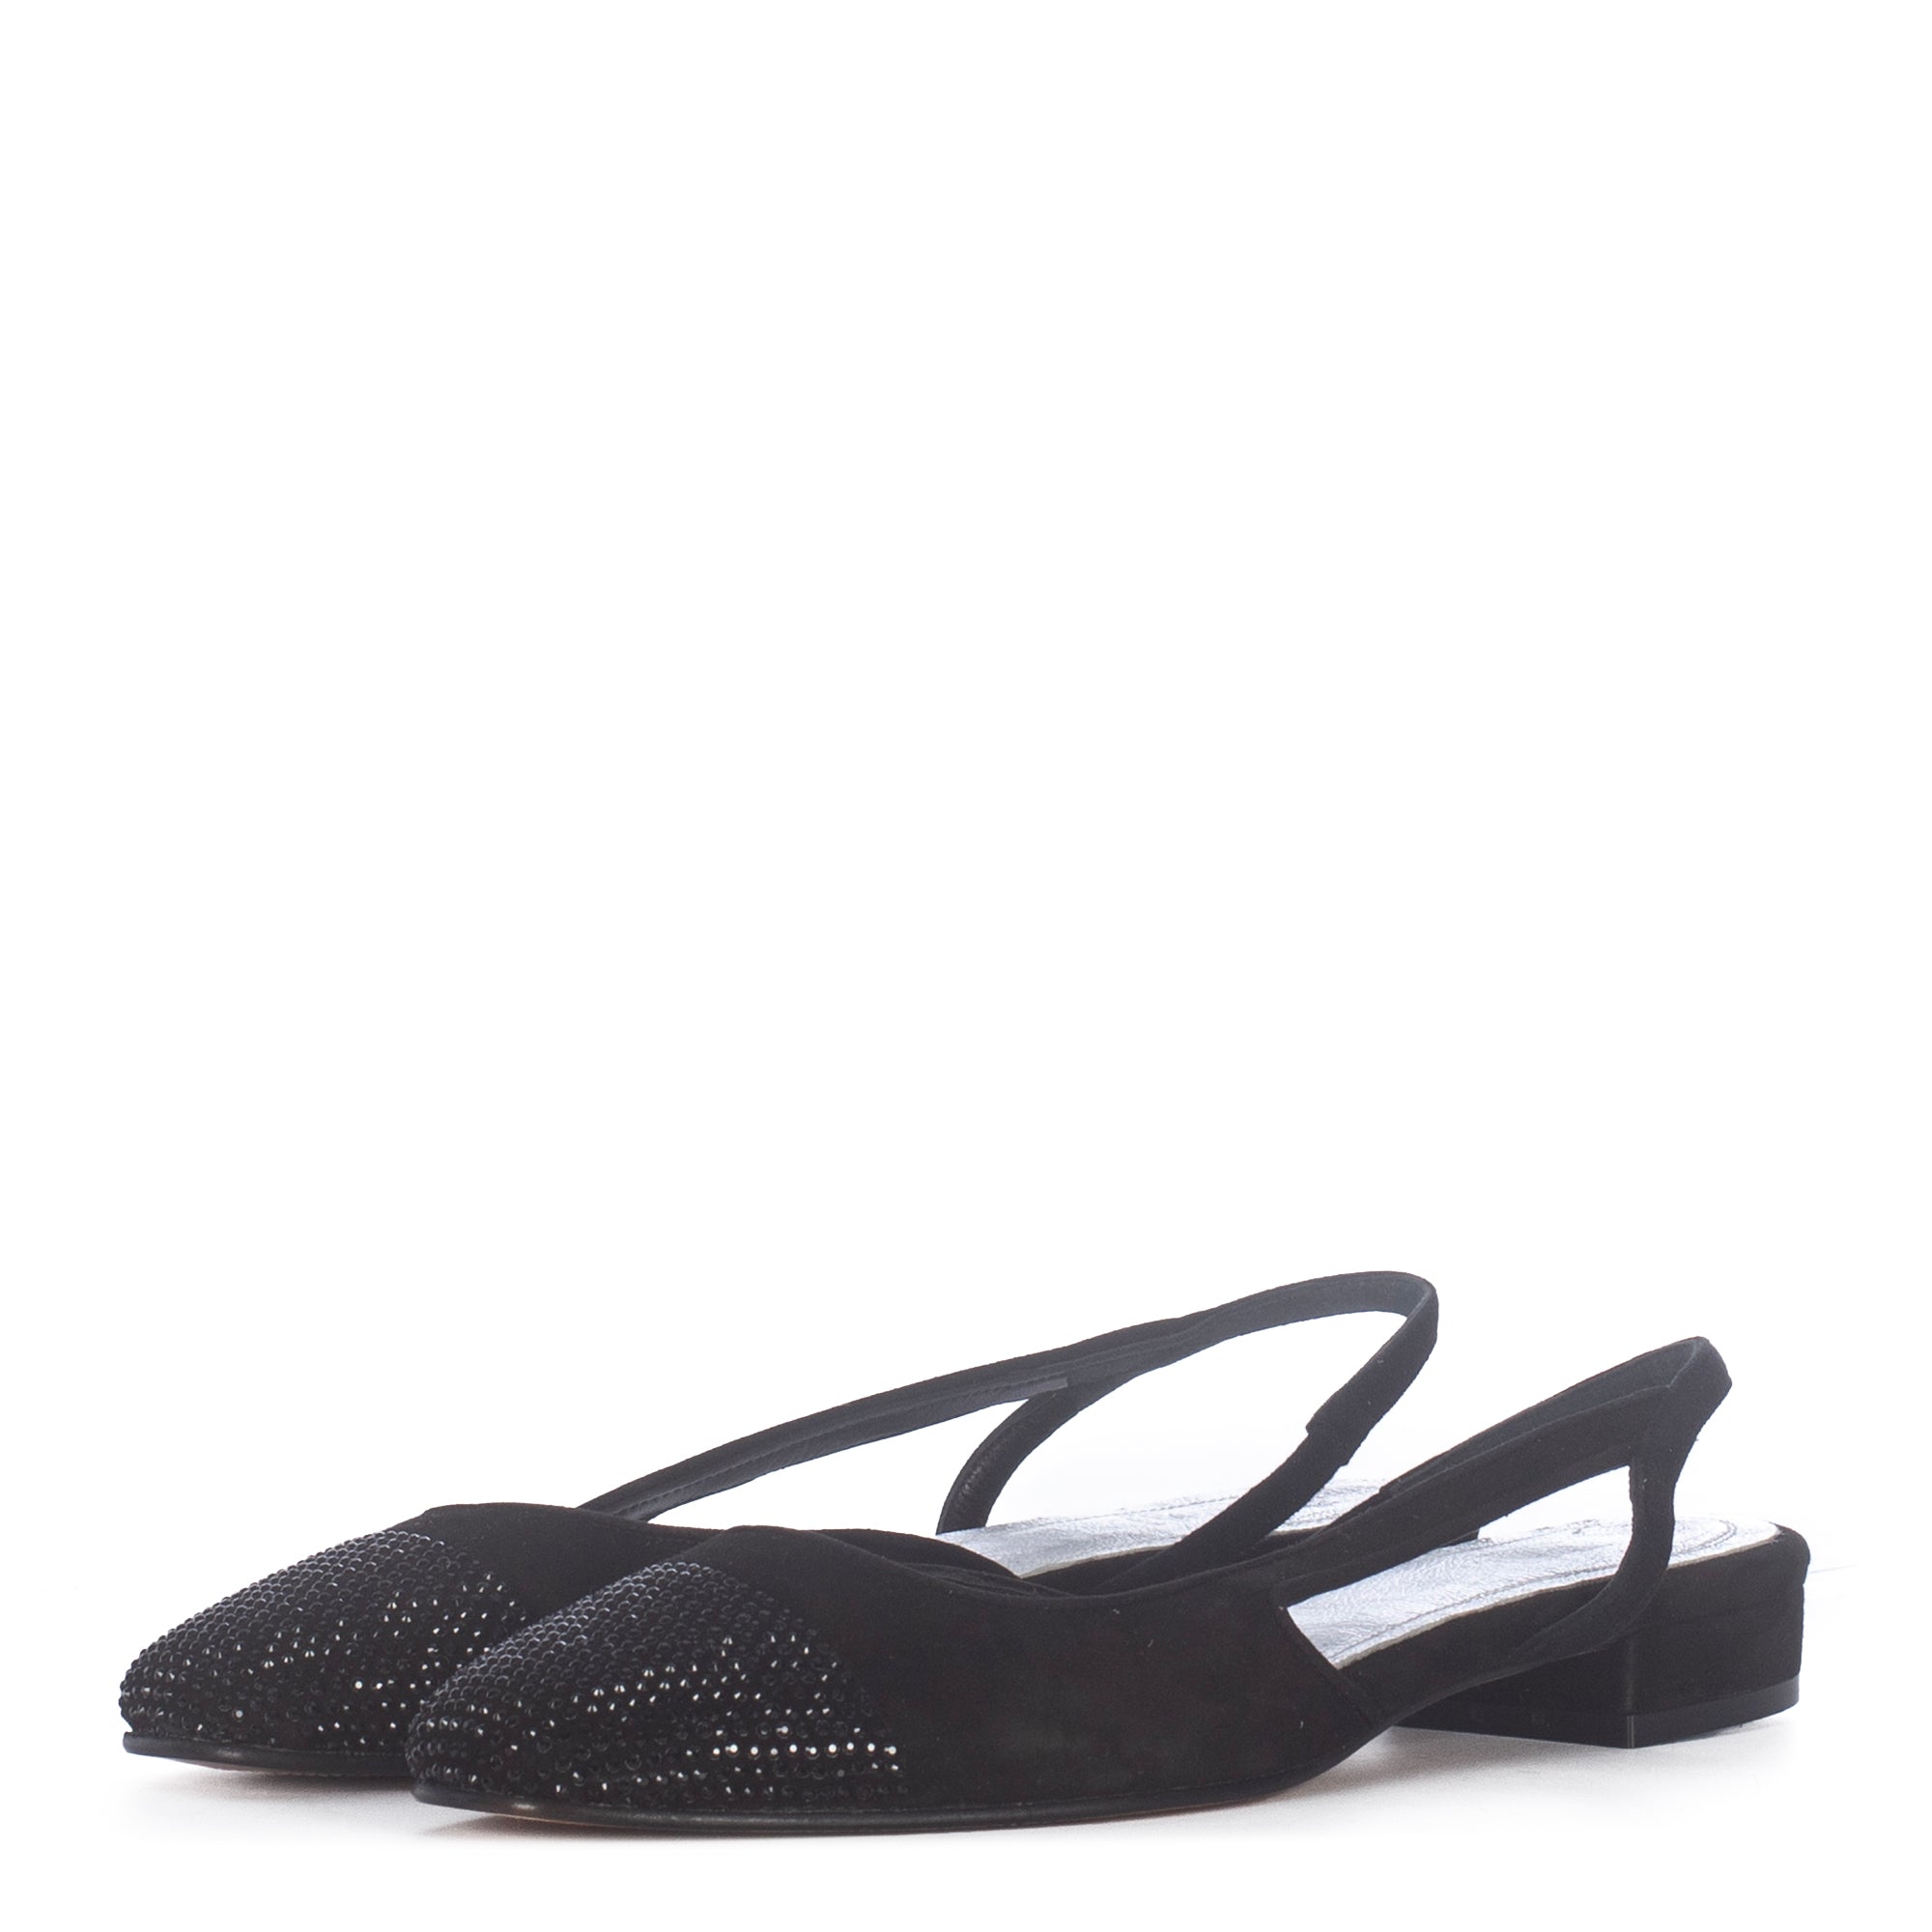 LILA STRASS BLACK SUEDE SANDALS